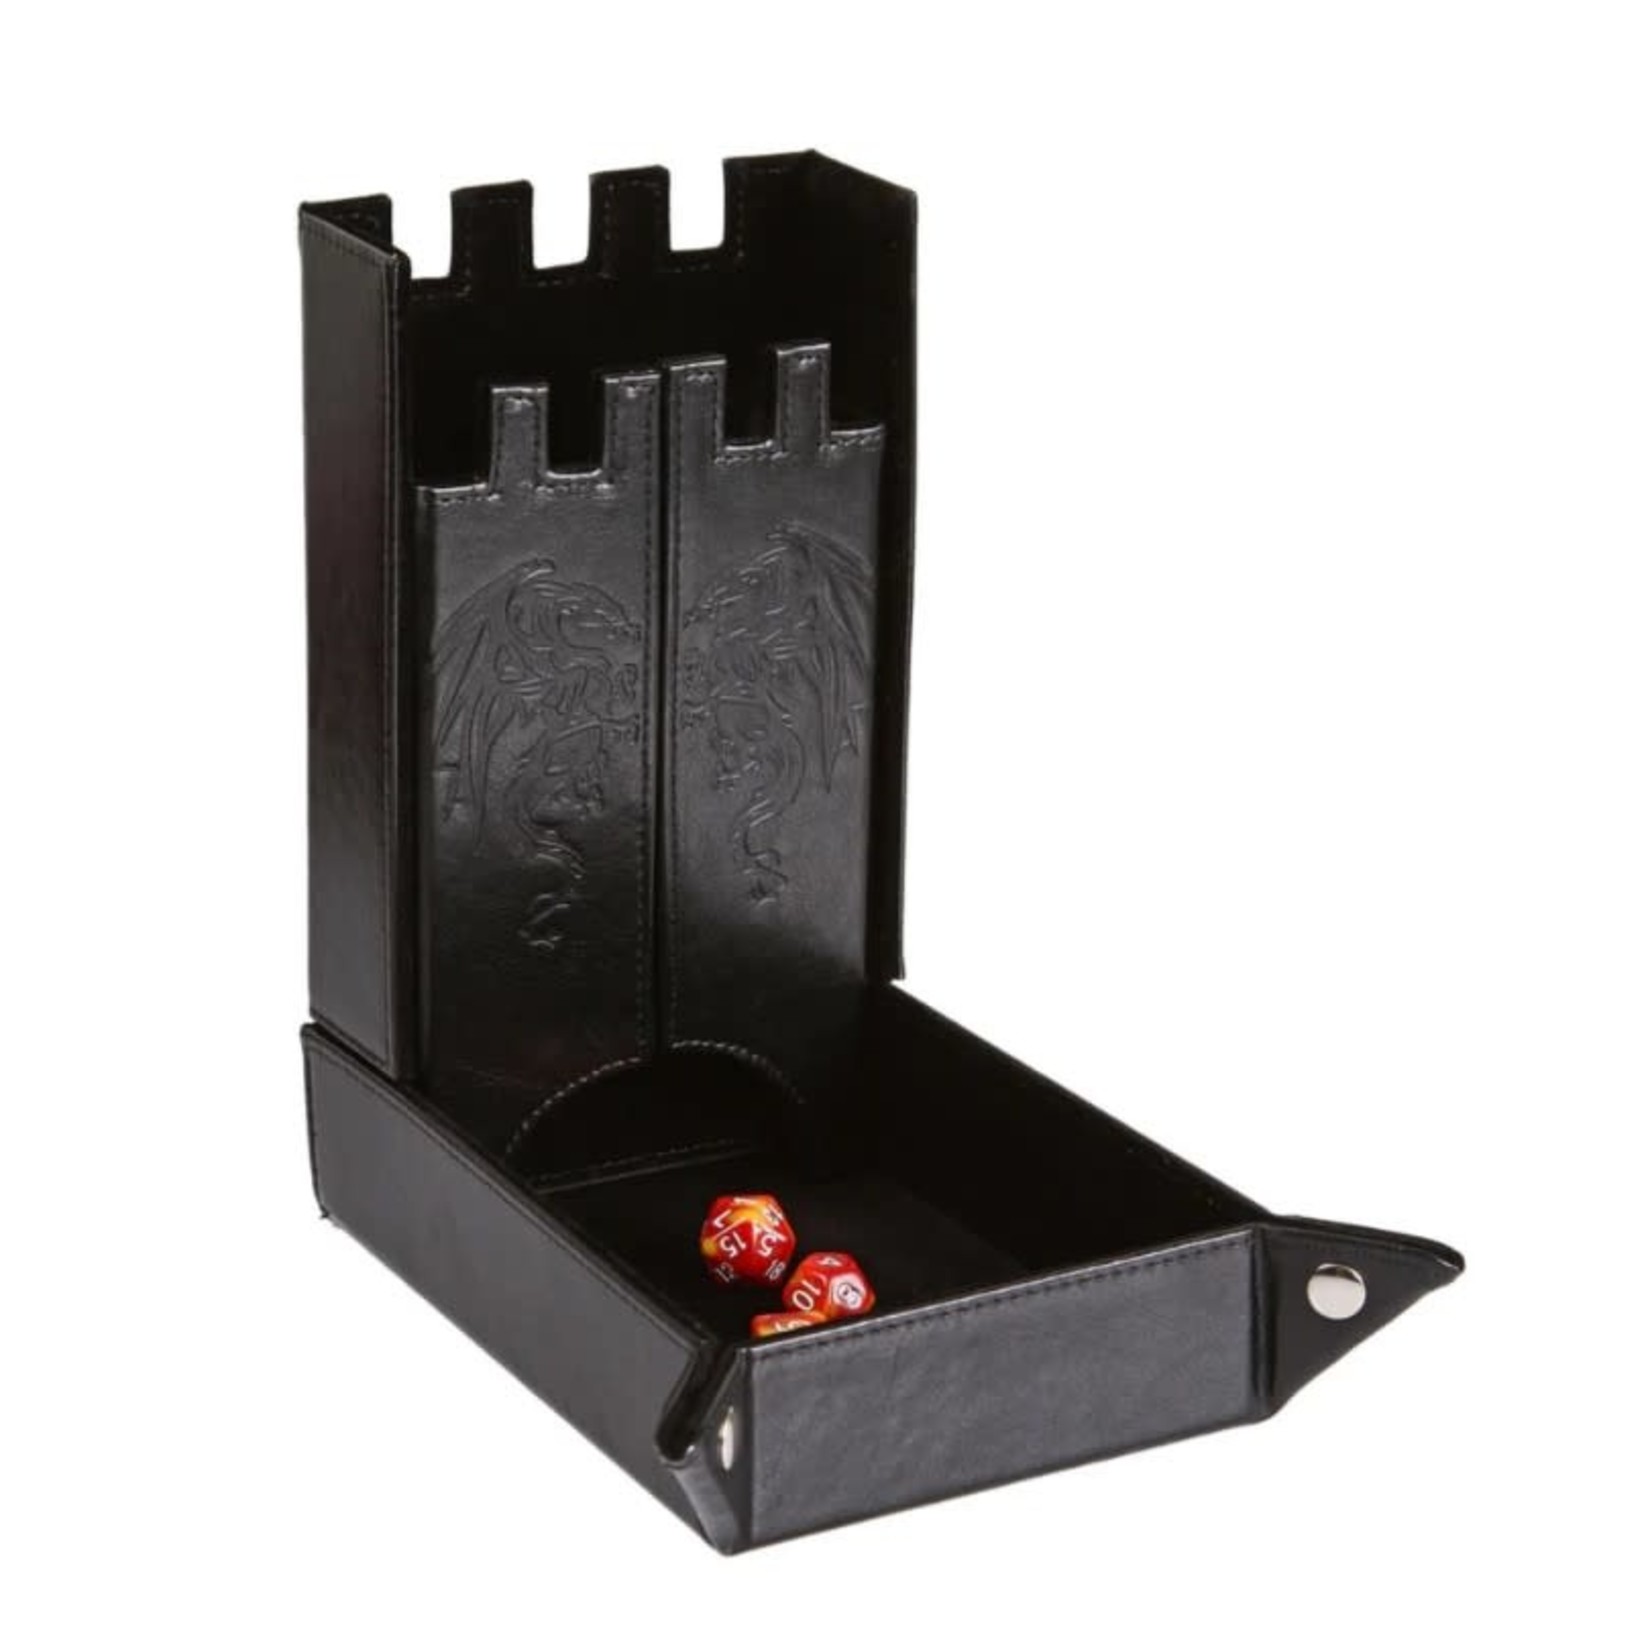 Forged Gaming Draco Castle Dice Tower & Dice Tray: Black